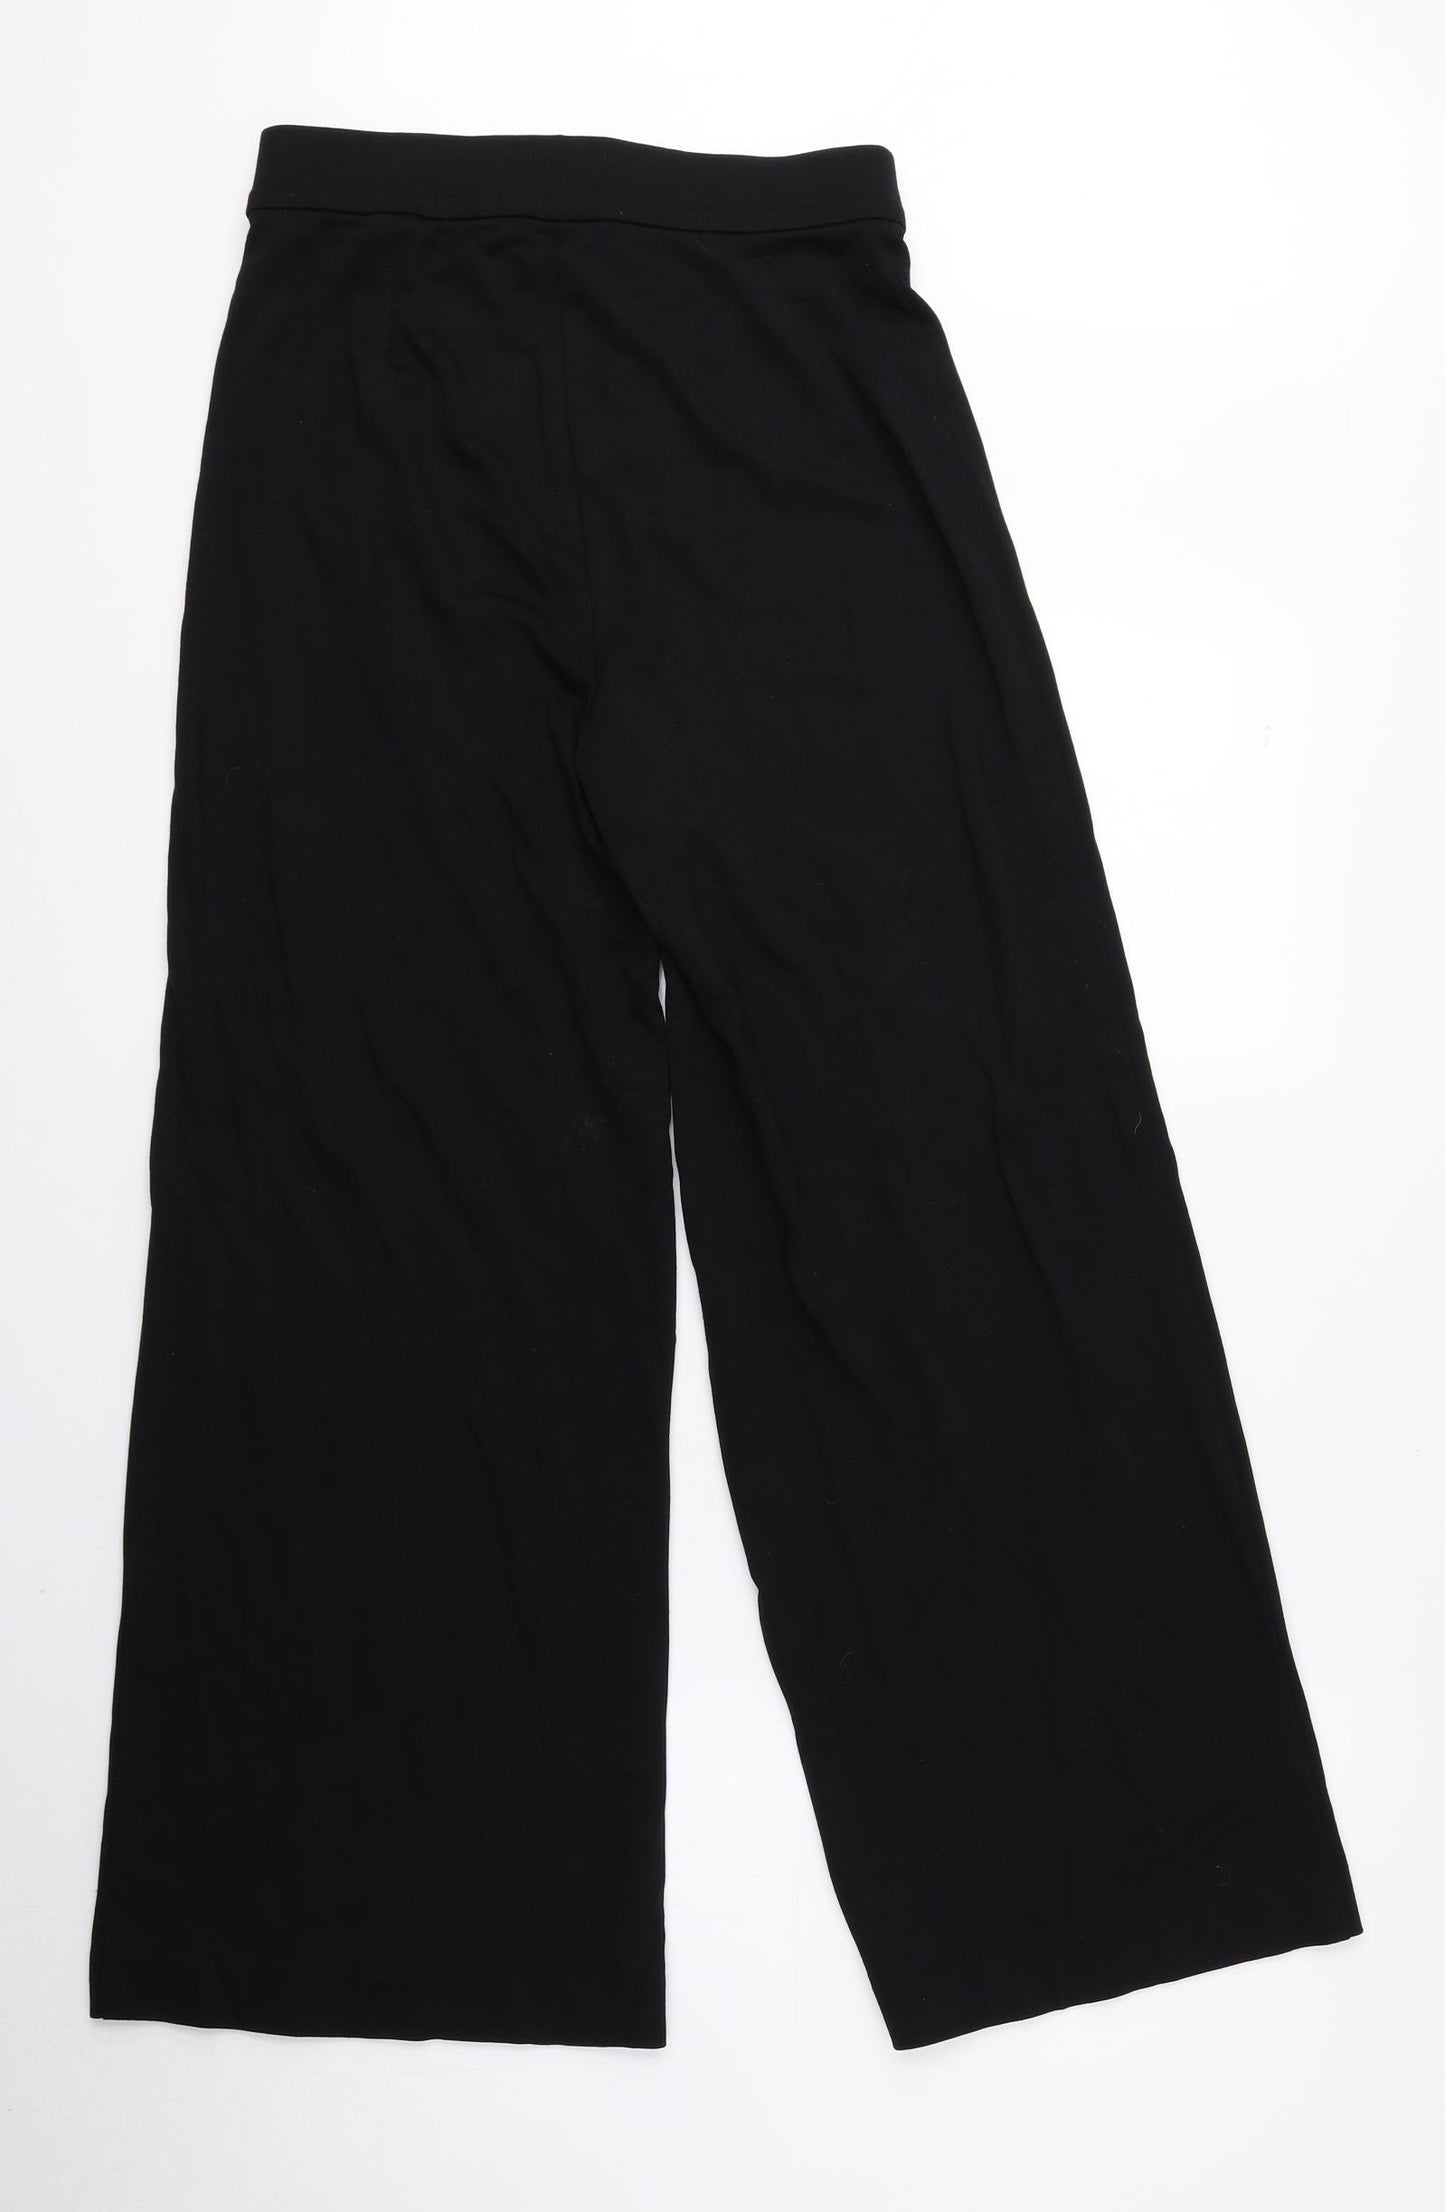 Marks and Spencer Womens Black Viscose Jogger Leggings Size 8 L27 in